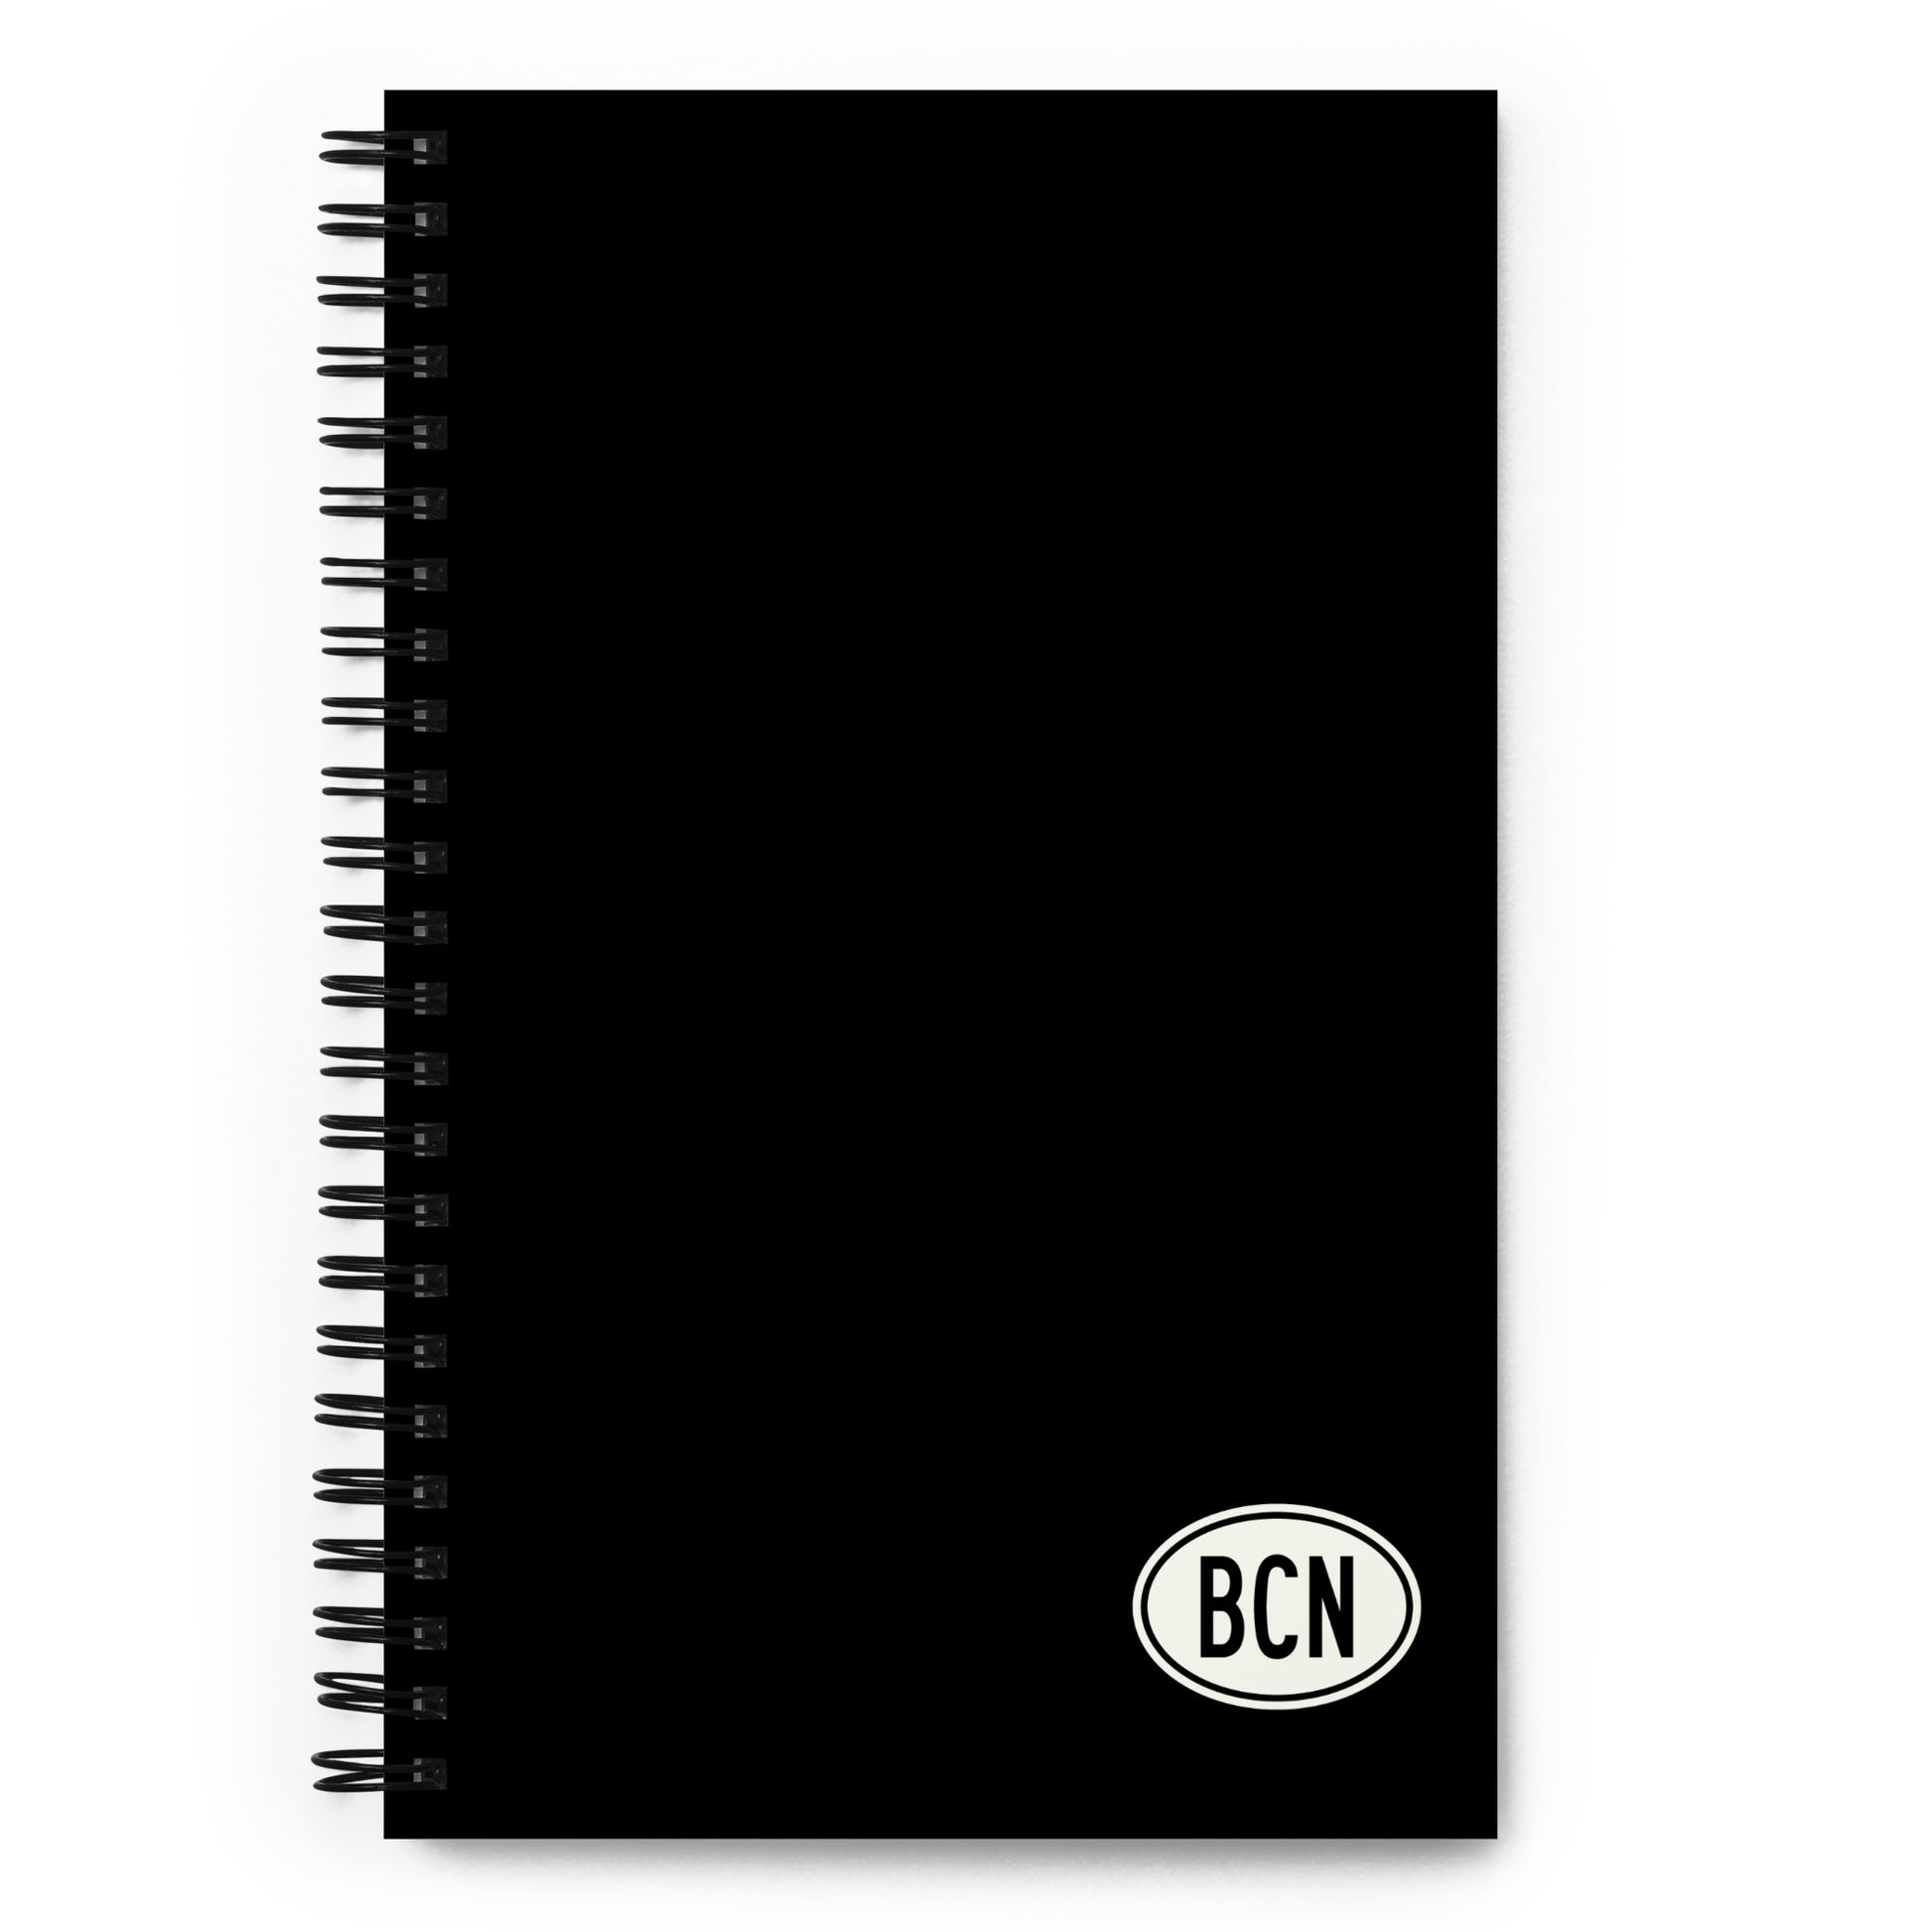 Unique Travel Gift Spiral Notebook - White Oval • BCN Barcelona • YHM Designs - Image 01